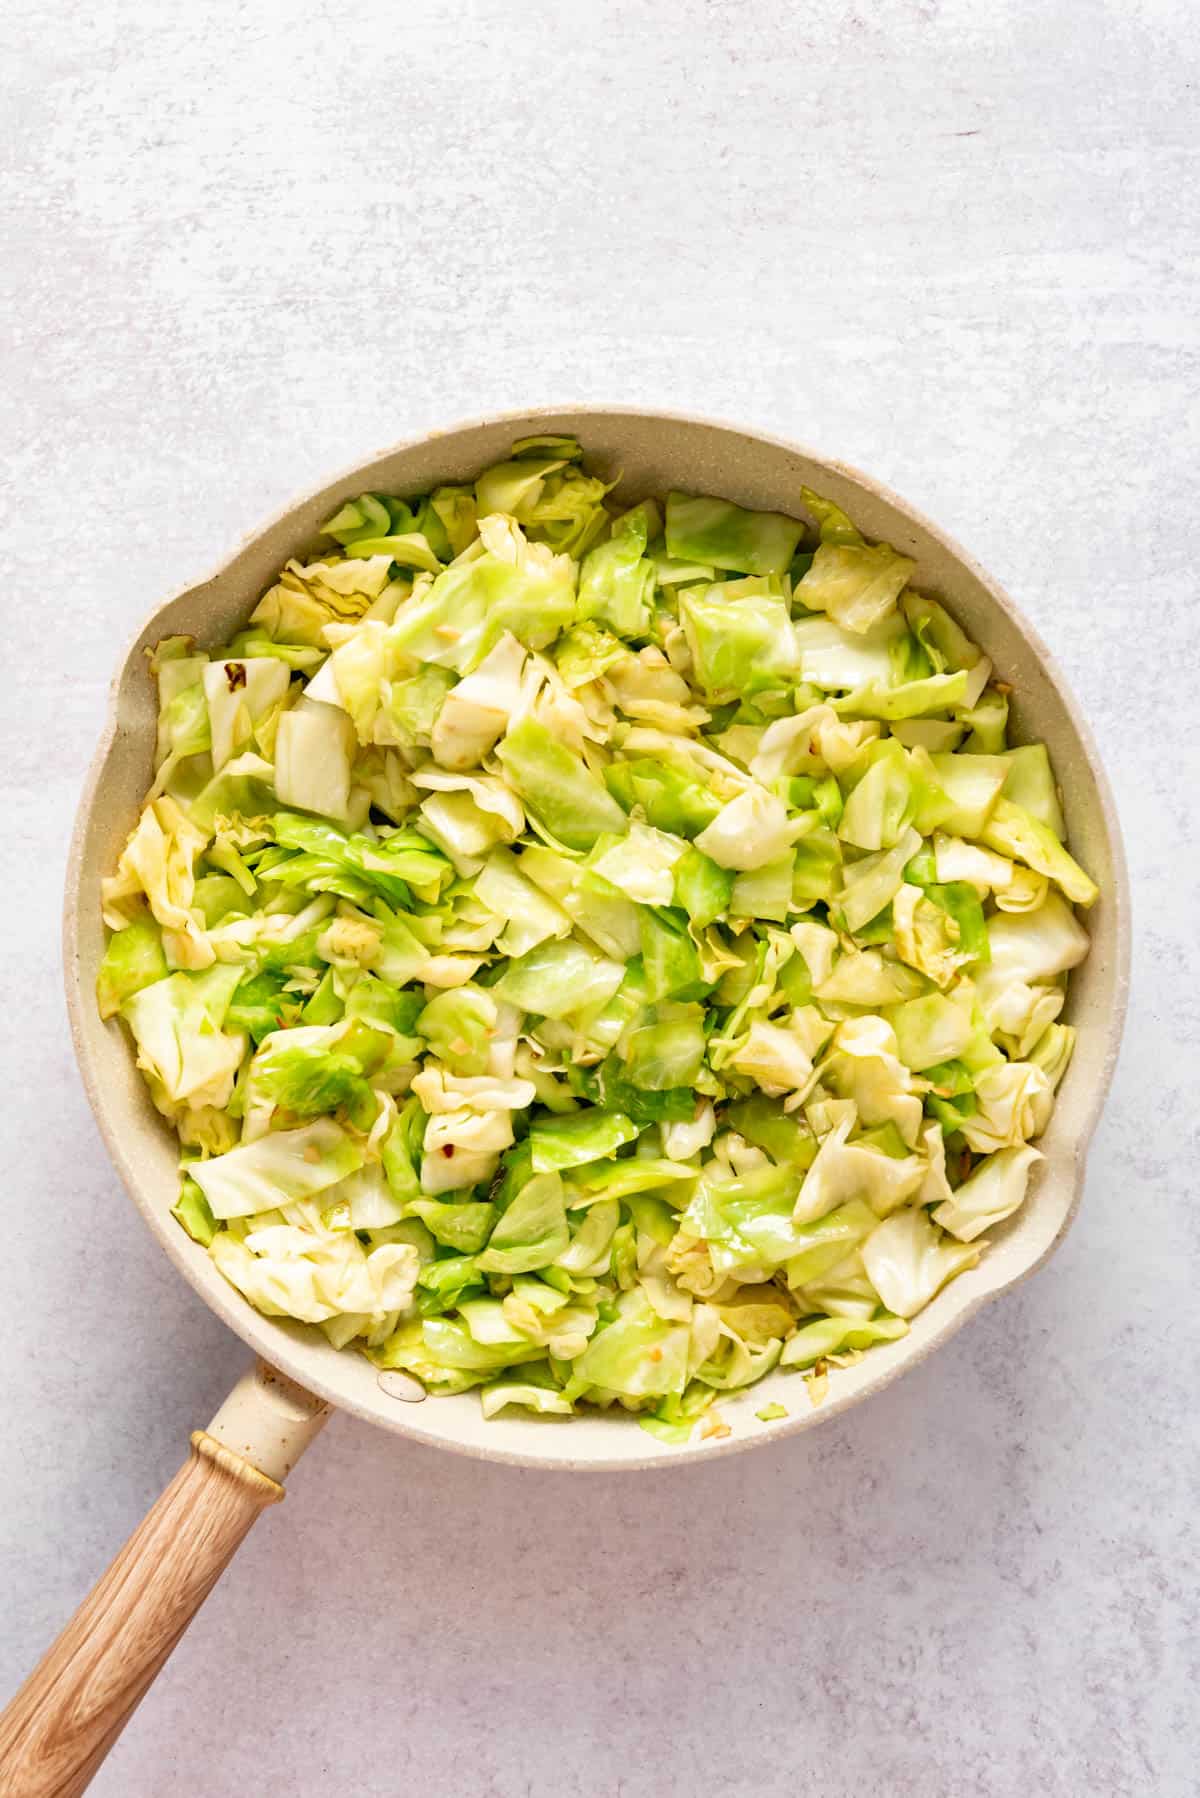 Wilted, chopped green cabbage in a pan after being sauteed.